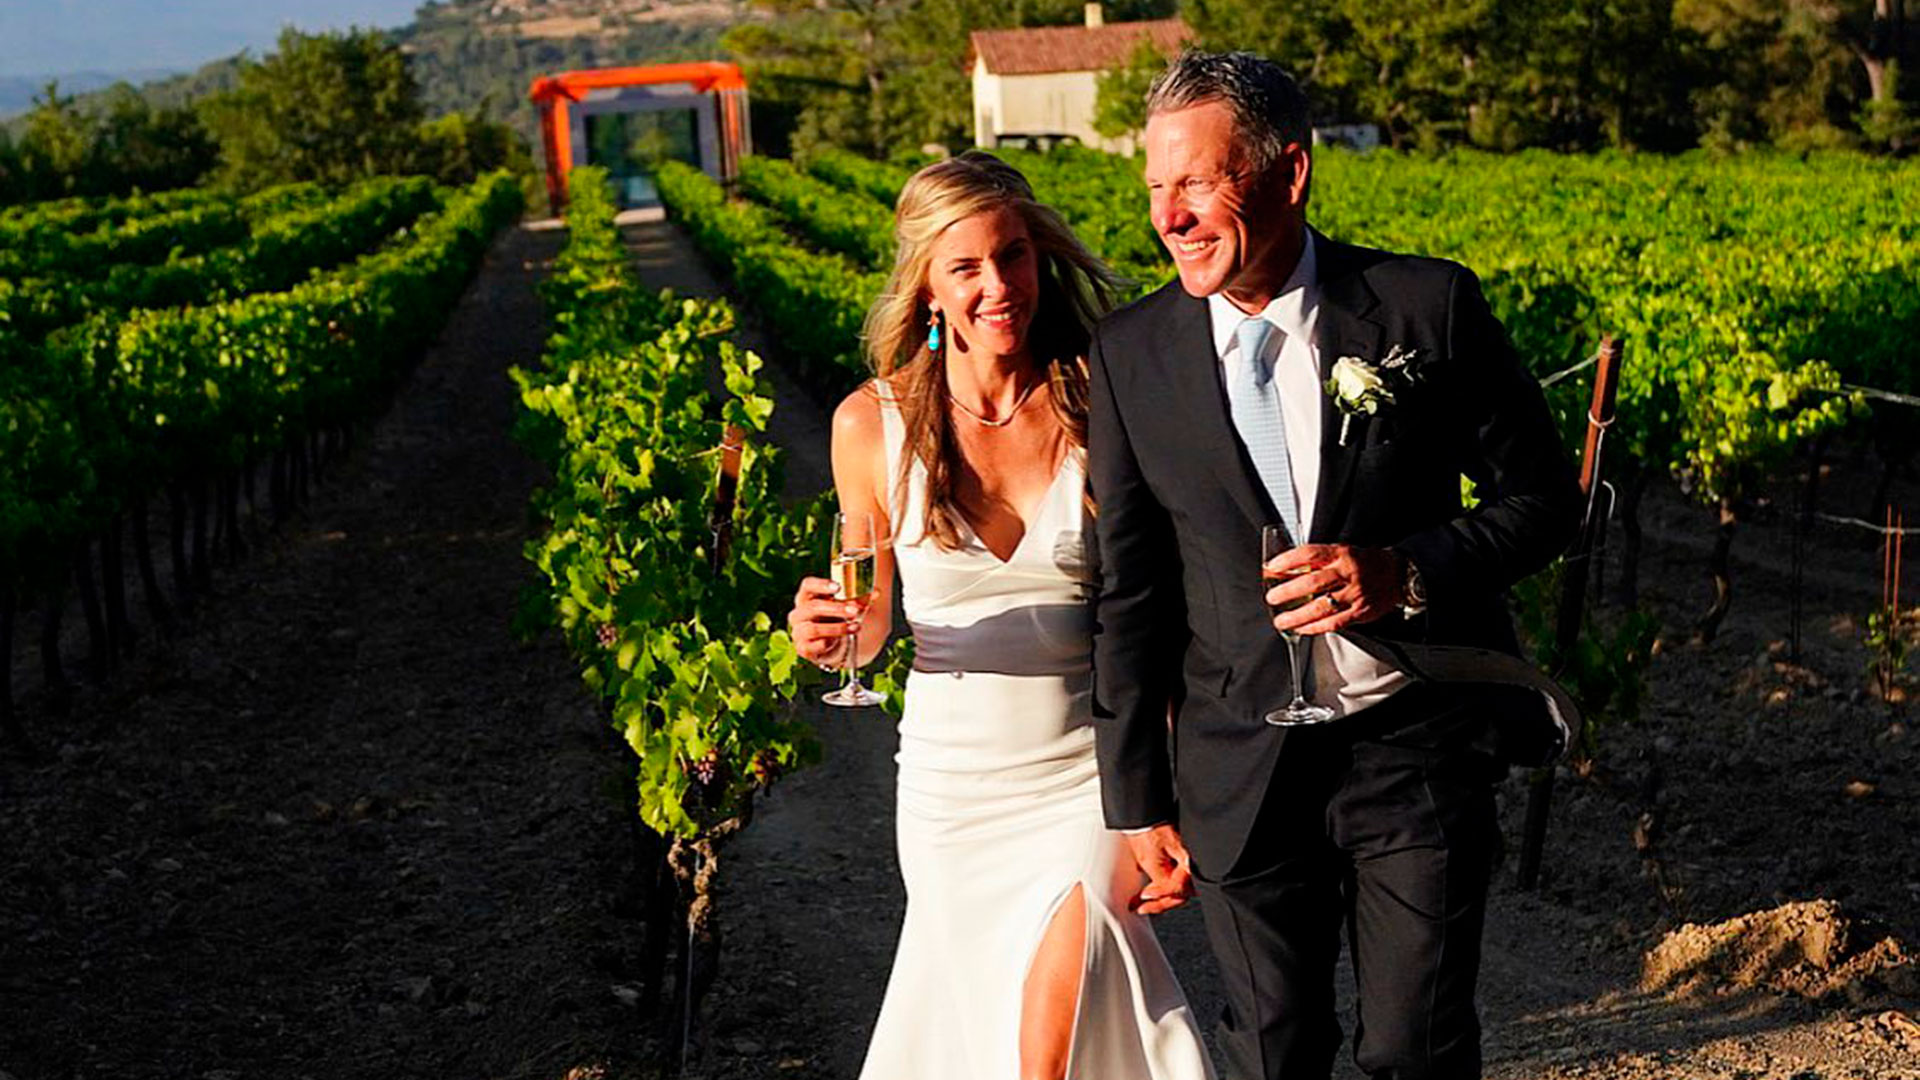     Lance Armstrong with his new wife Anna Hansen (@lancearmstrong)